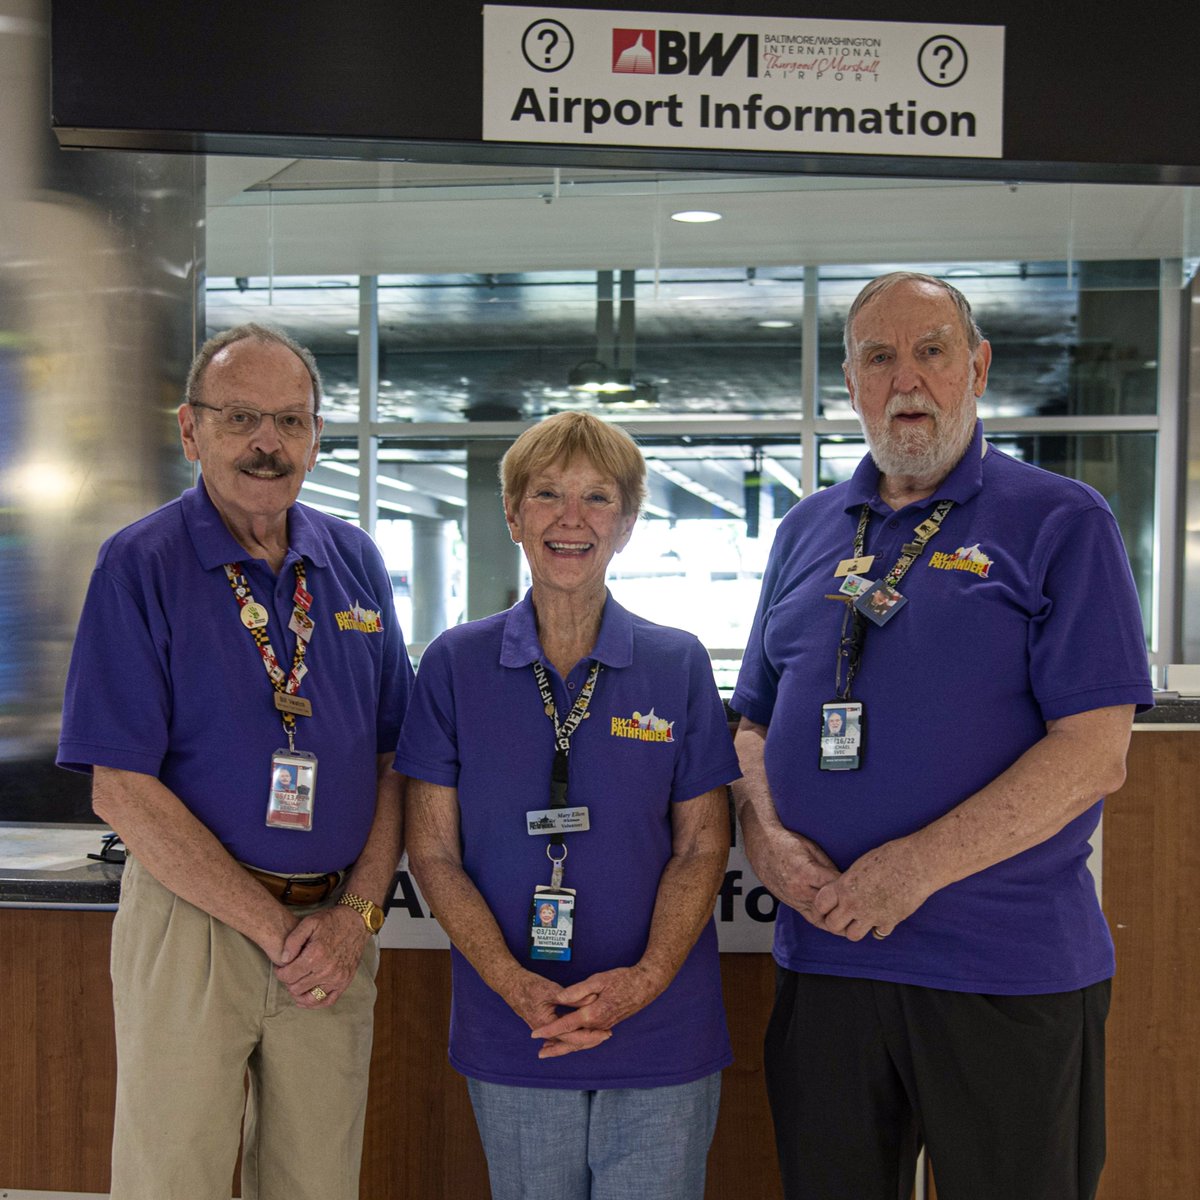 Our Pathfinder volunteers assist tens of thousands of passengers each year. They are committed to our passengers, offering assistance at Information Desks every day of the year. Join us in saying THANK YOU to our wonderful team of volunteers. #NationalVolunteerWeek #airports